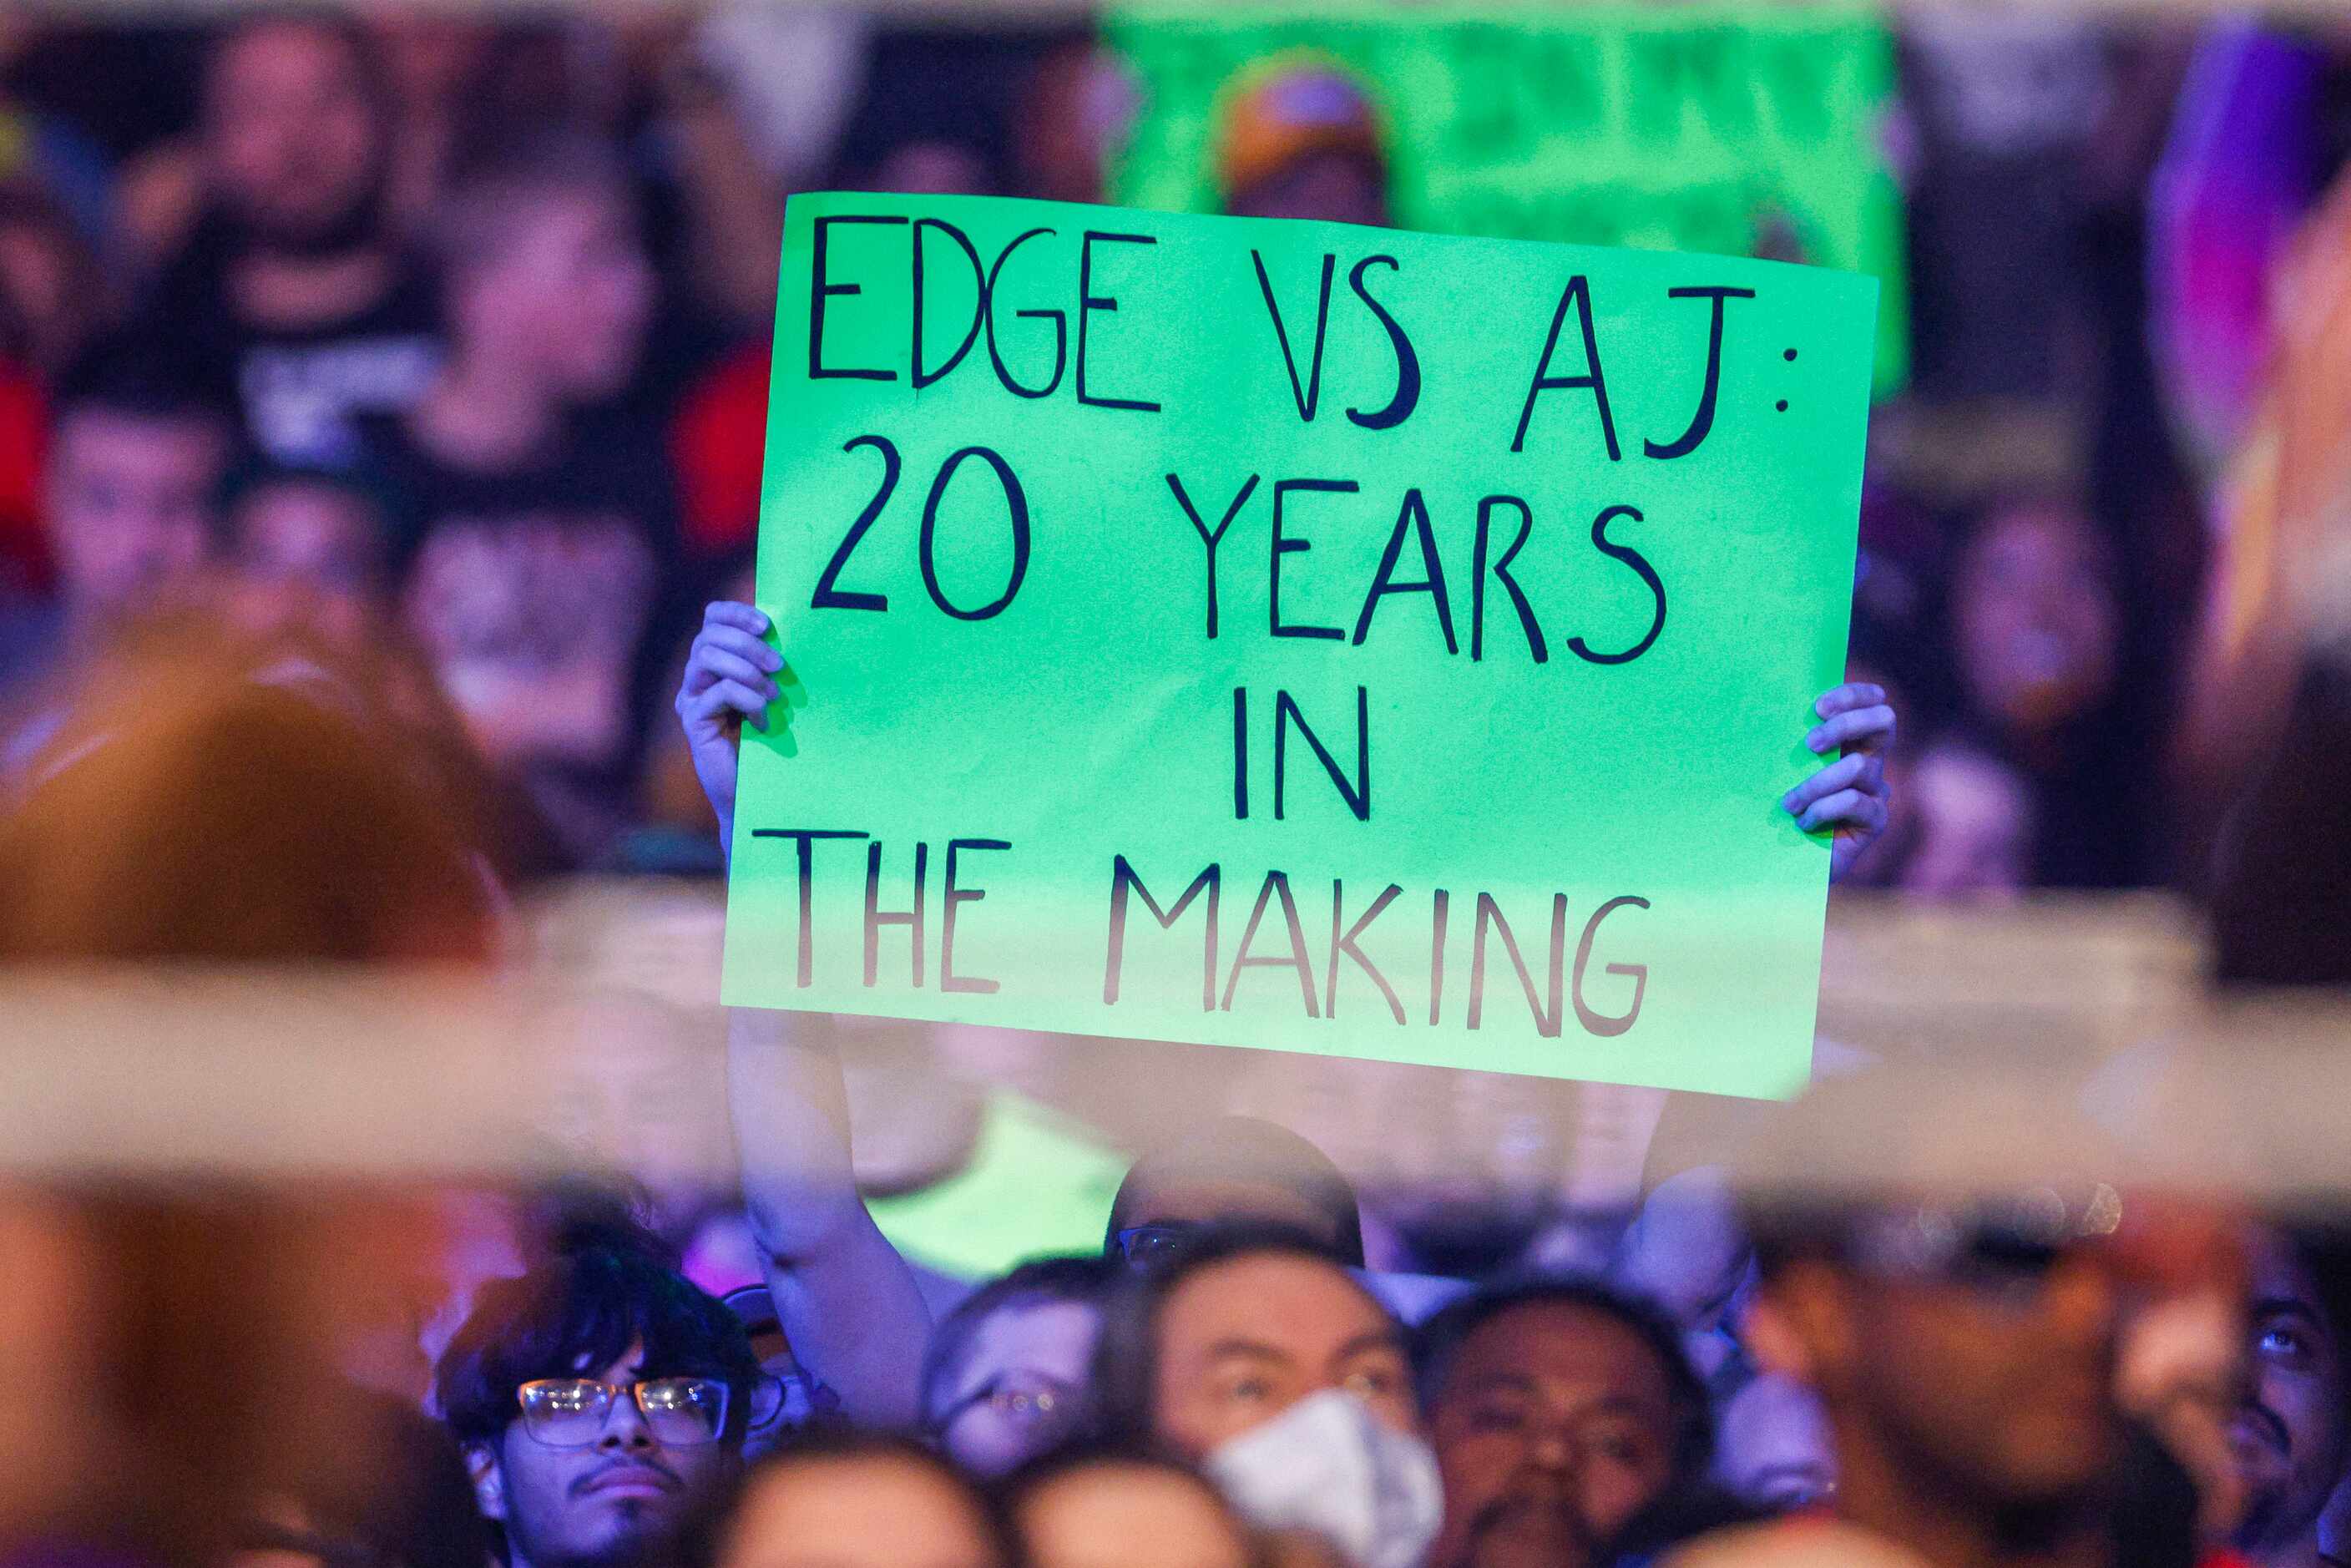 A fan raises a sign during a match between Edge and AJ Styles at WrestleMania Sunday at AT&T...